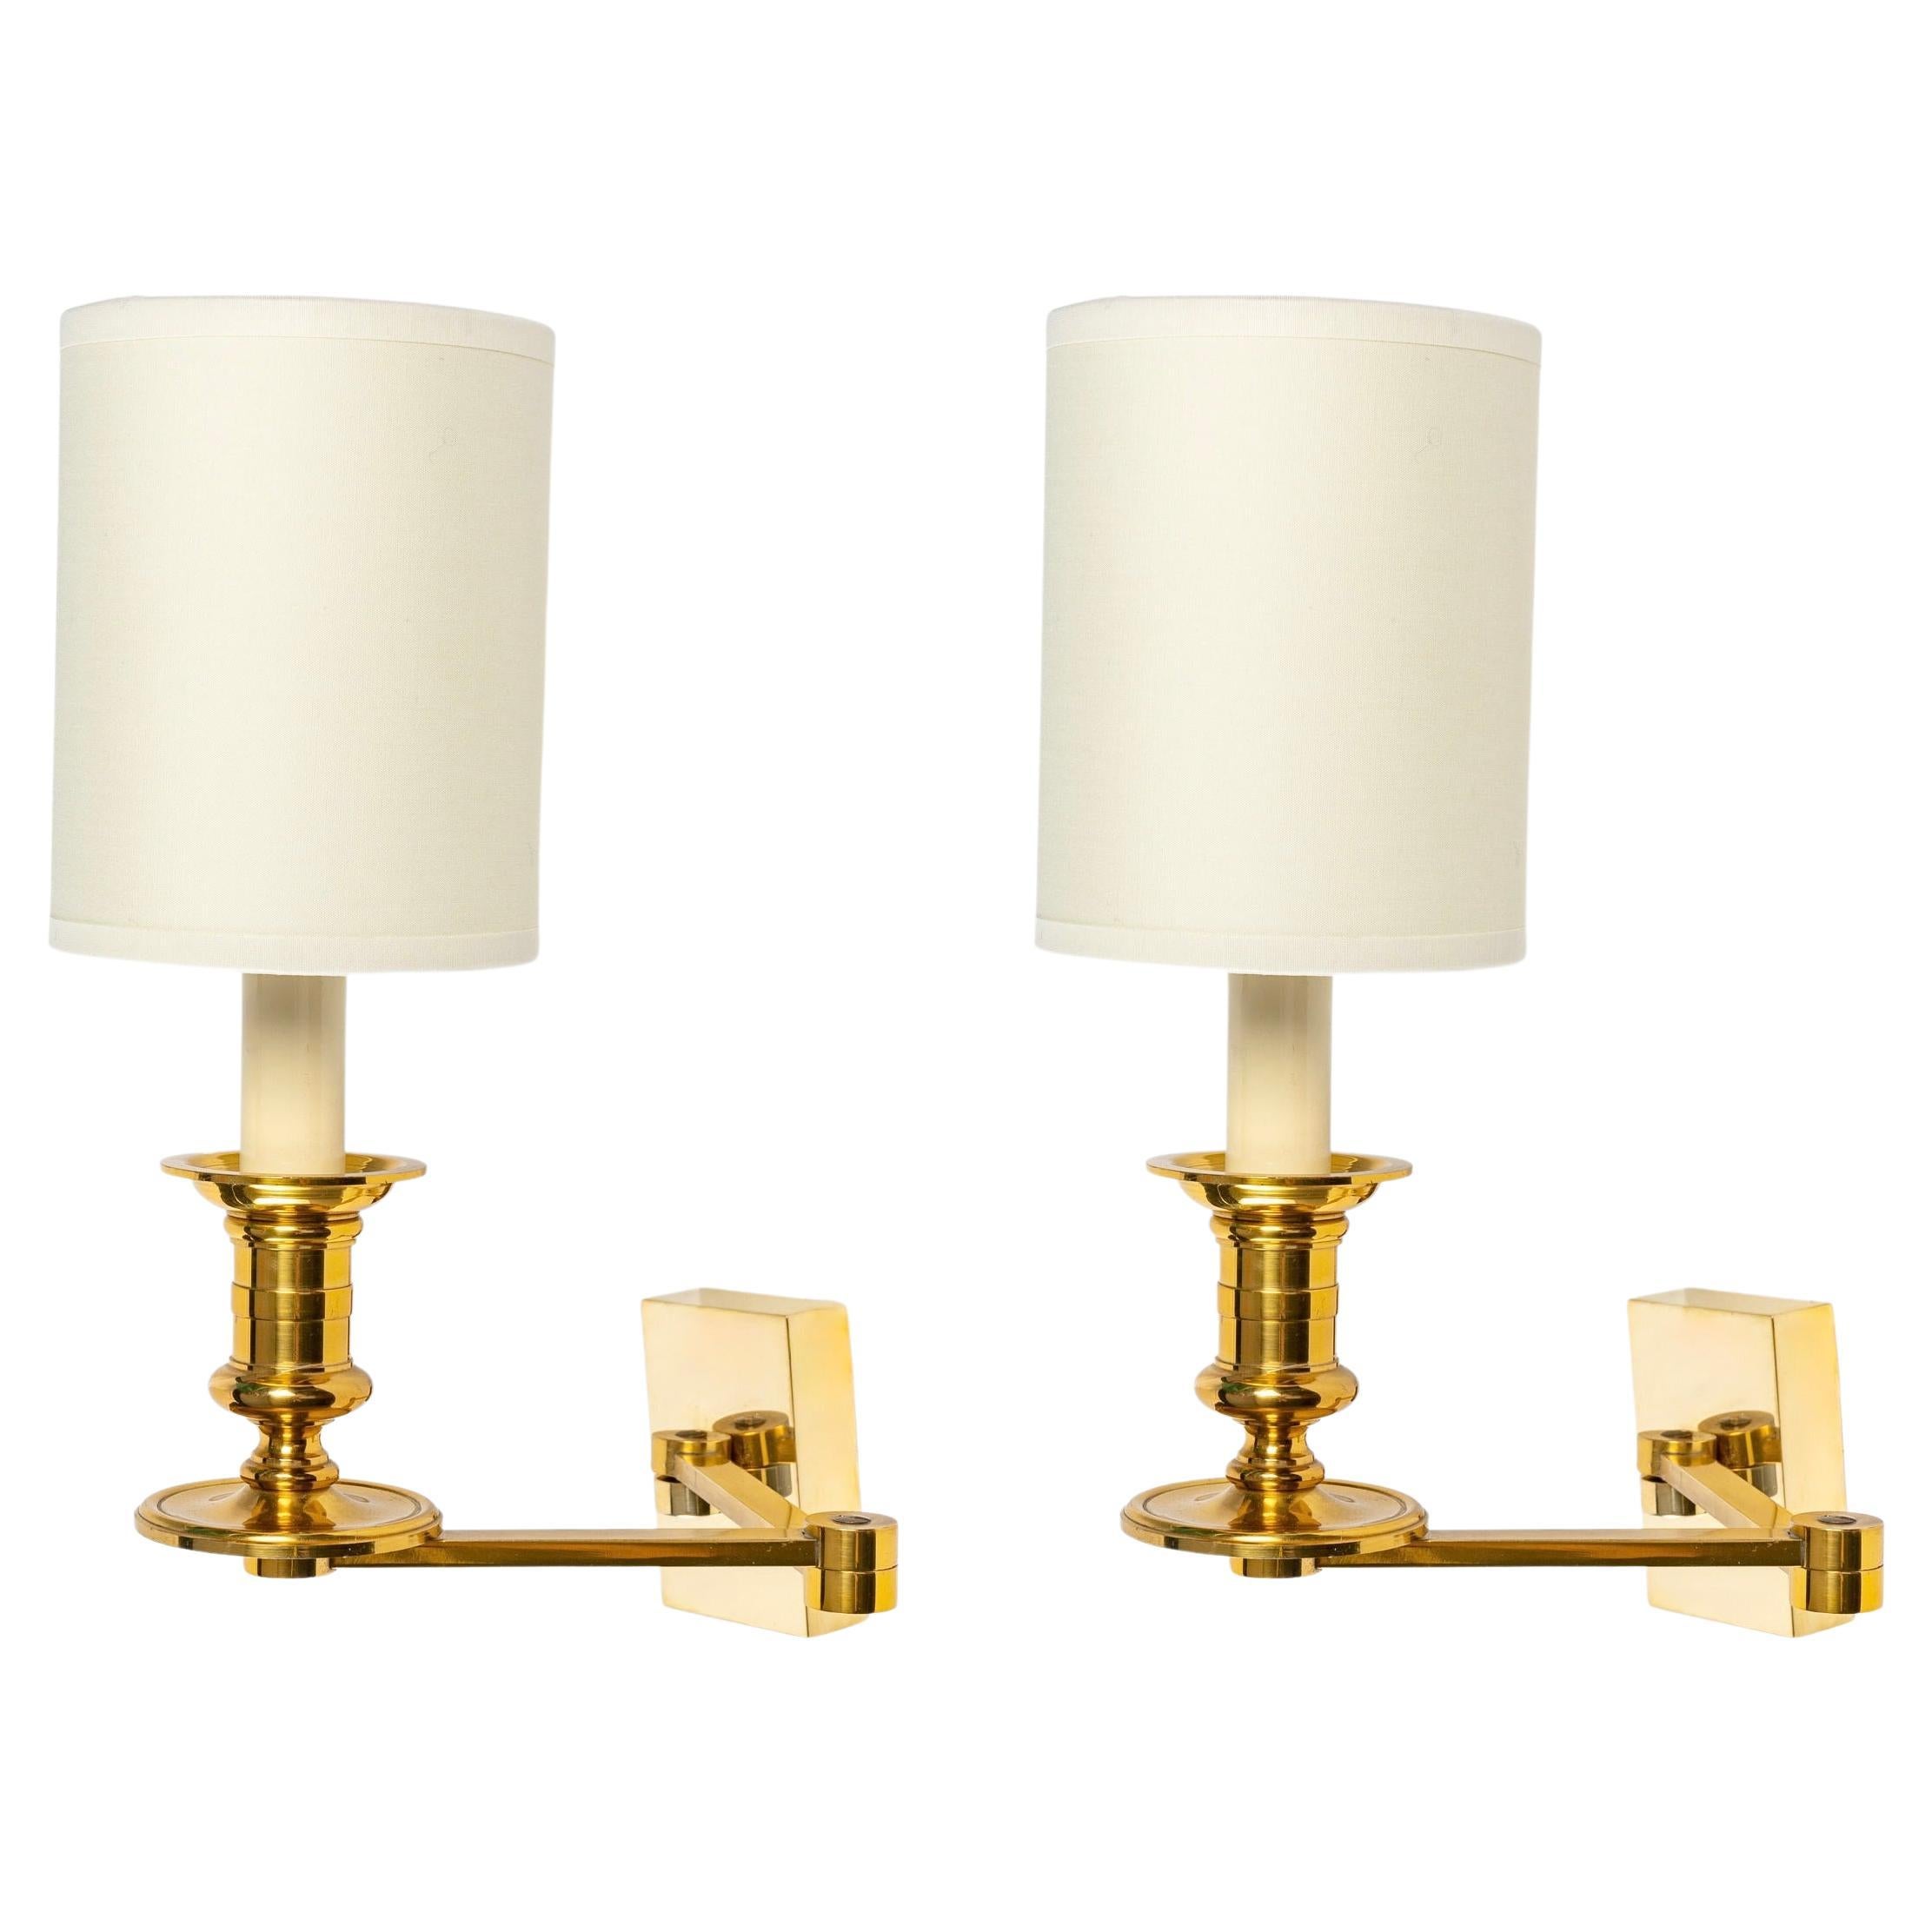 1960, Pair of Sconces with Pivoting Arm in Gilded Bronze by Maison Jansen For Sale